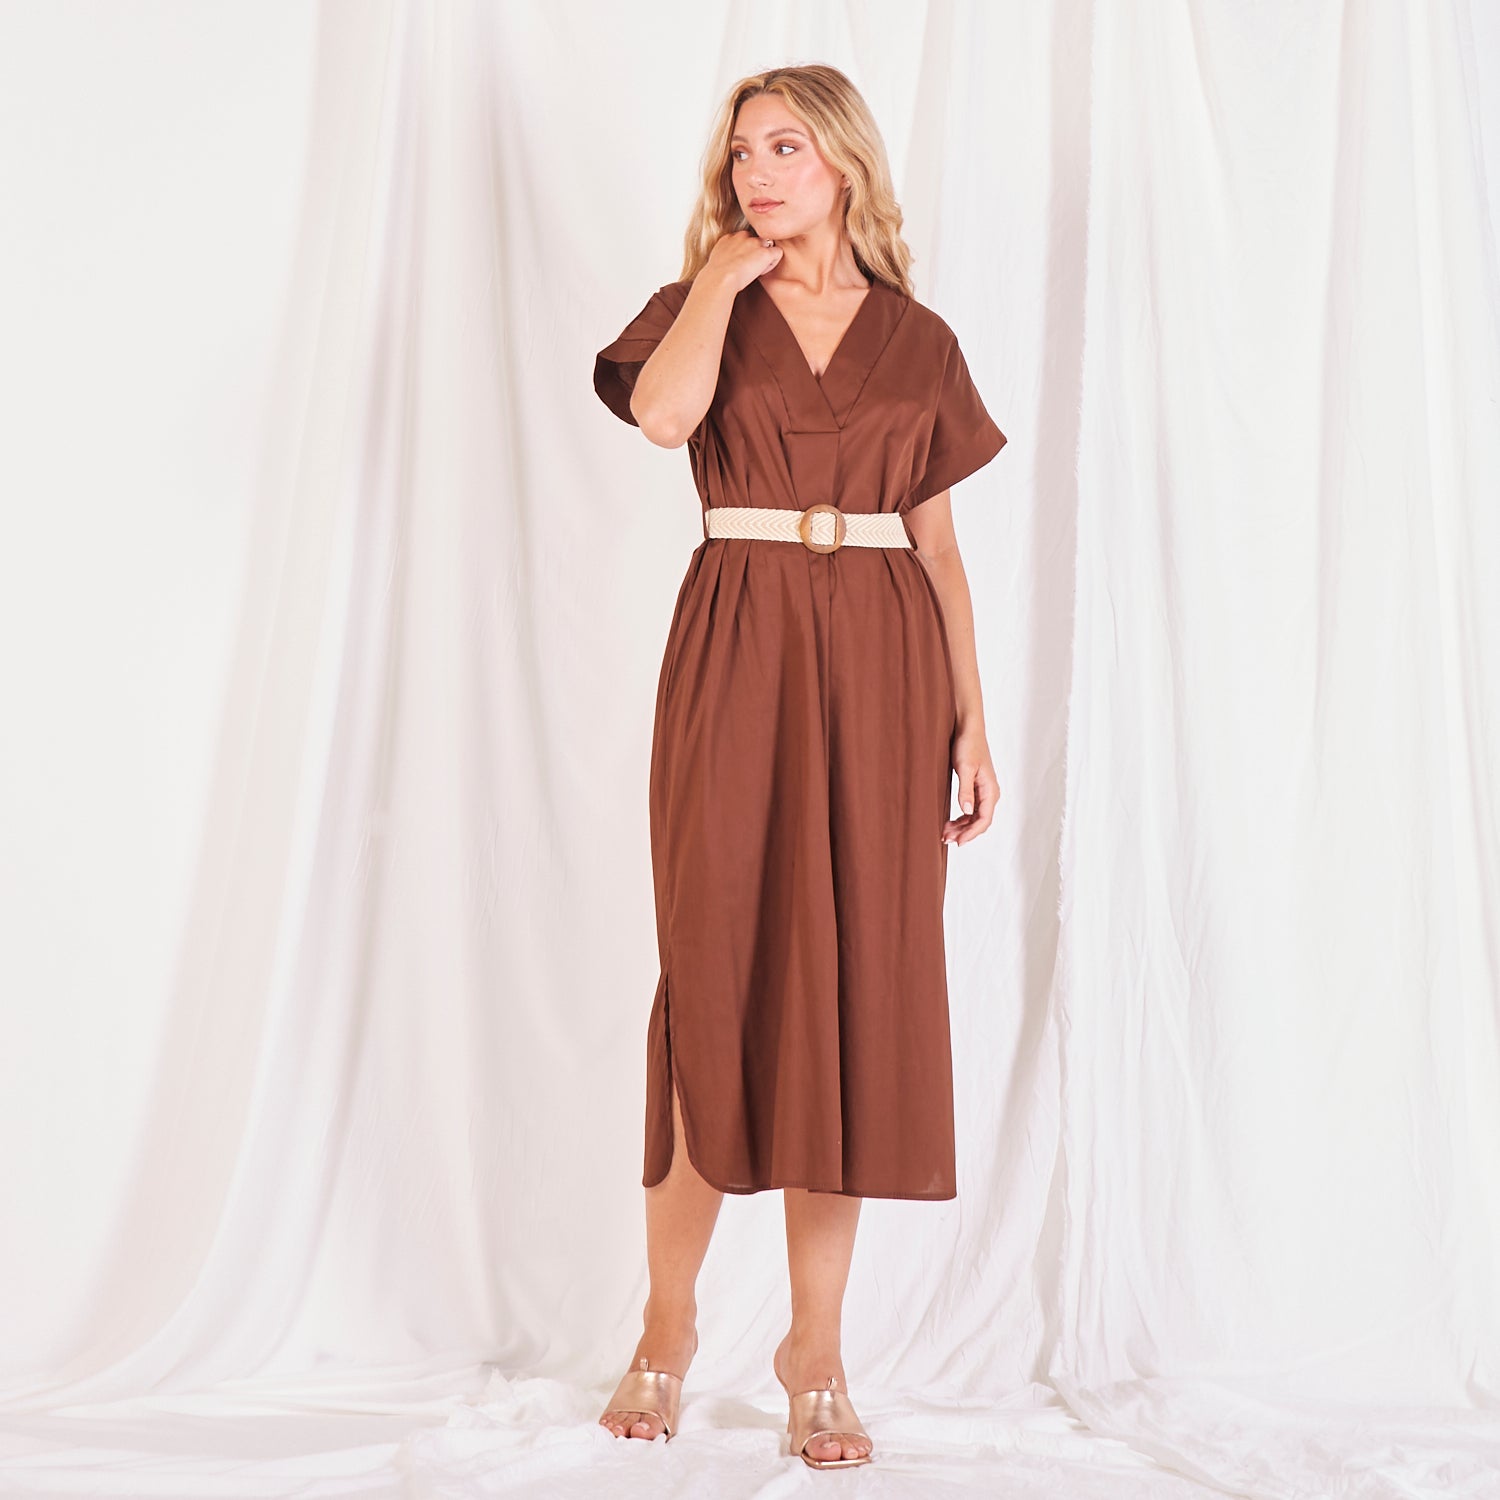 brown dress outfit ideas